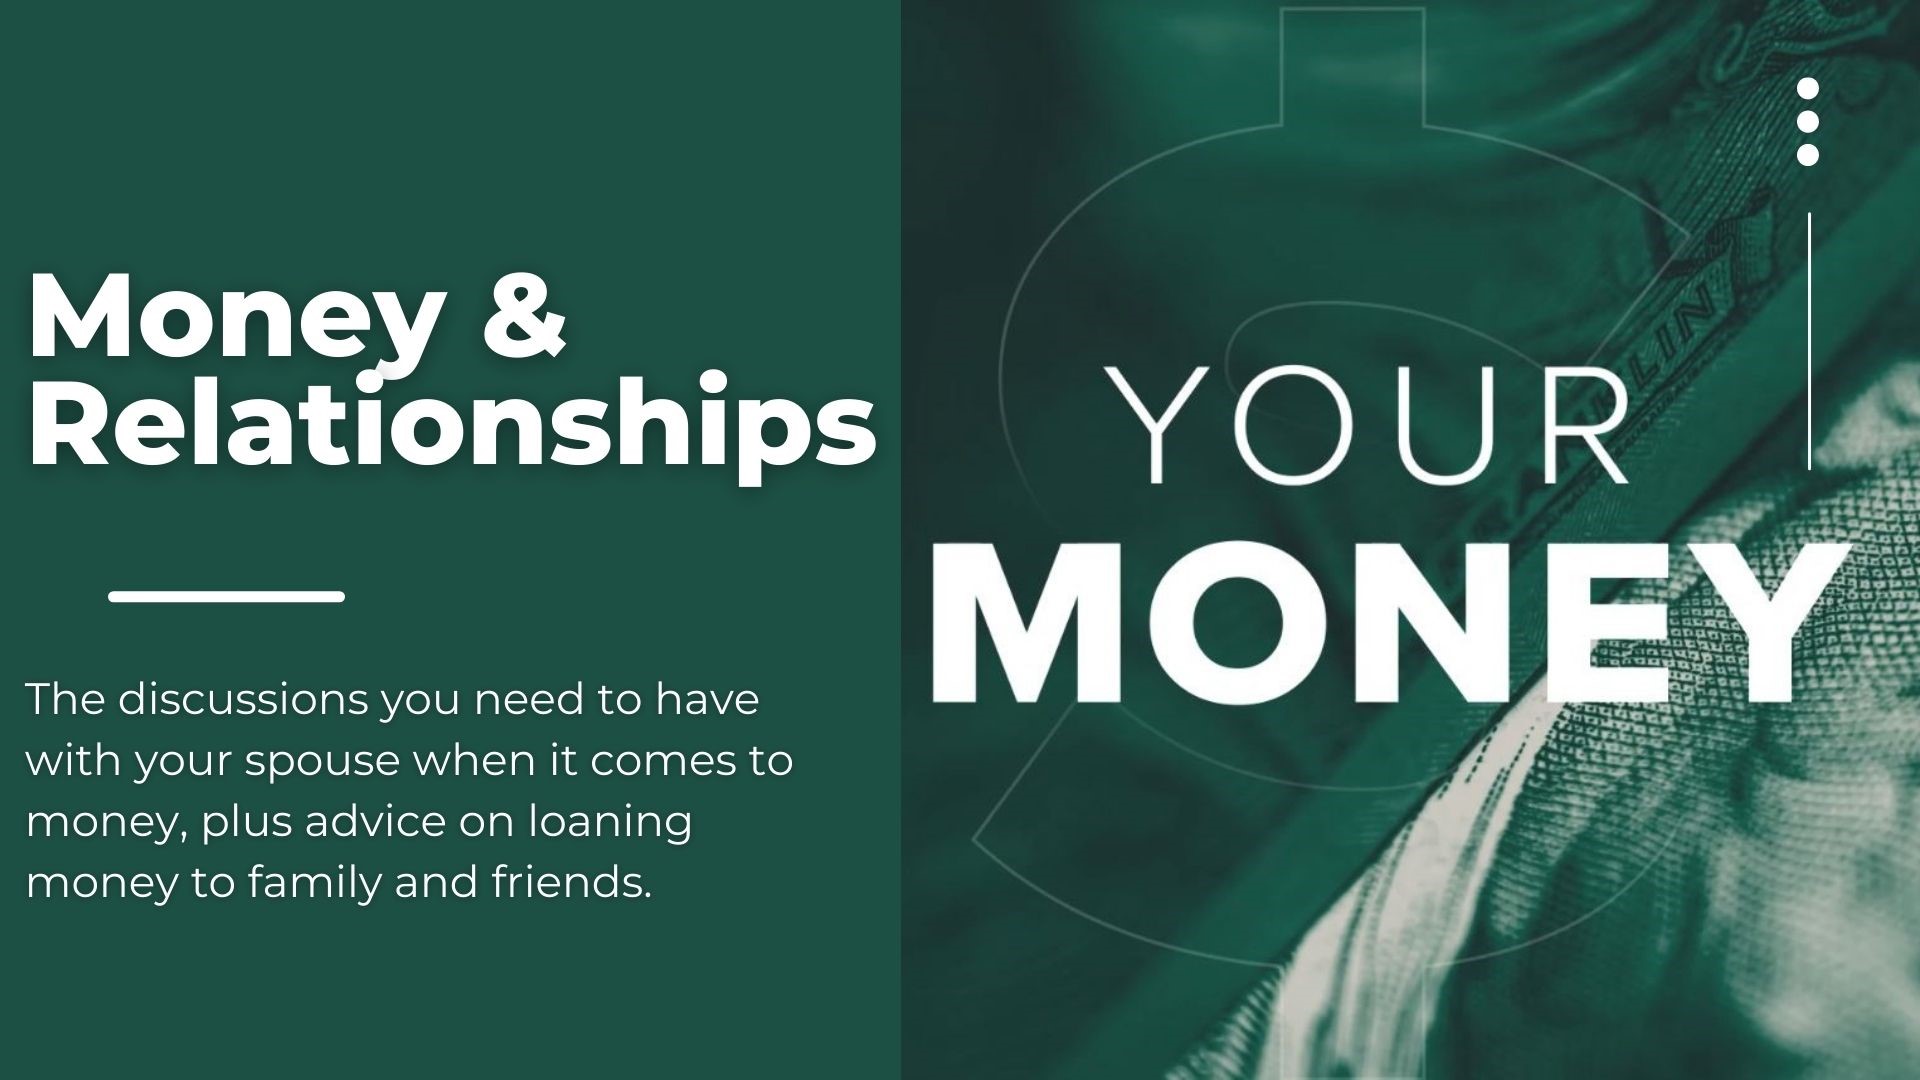 Discussing money and relationships and what you need to discuss with your partner when it comes to finances and loans.